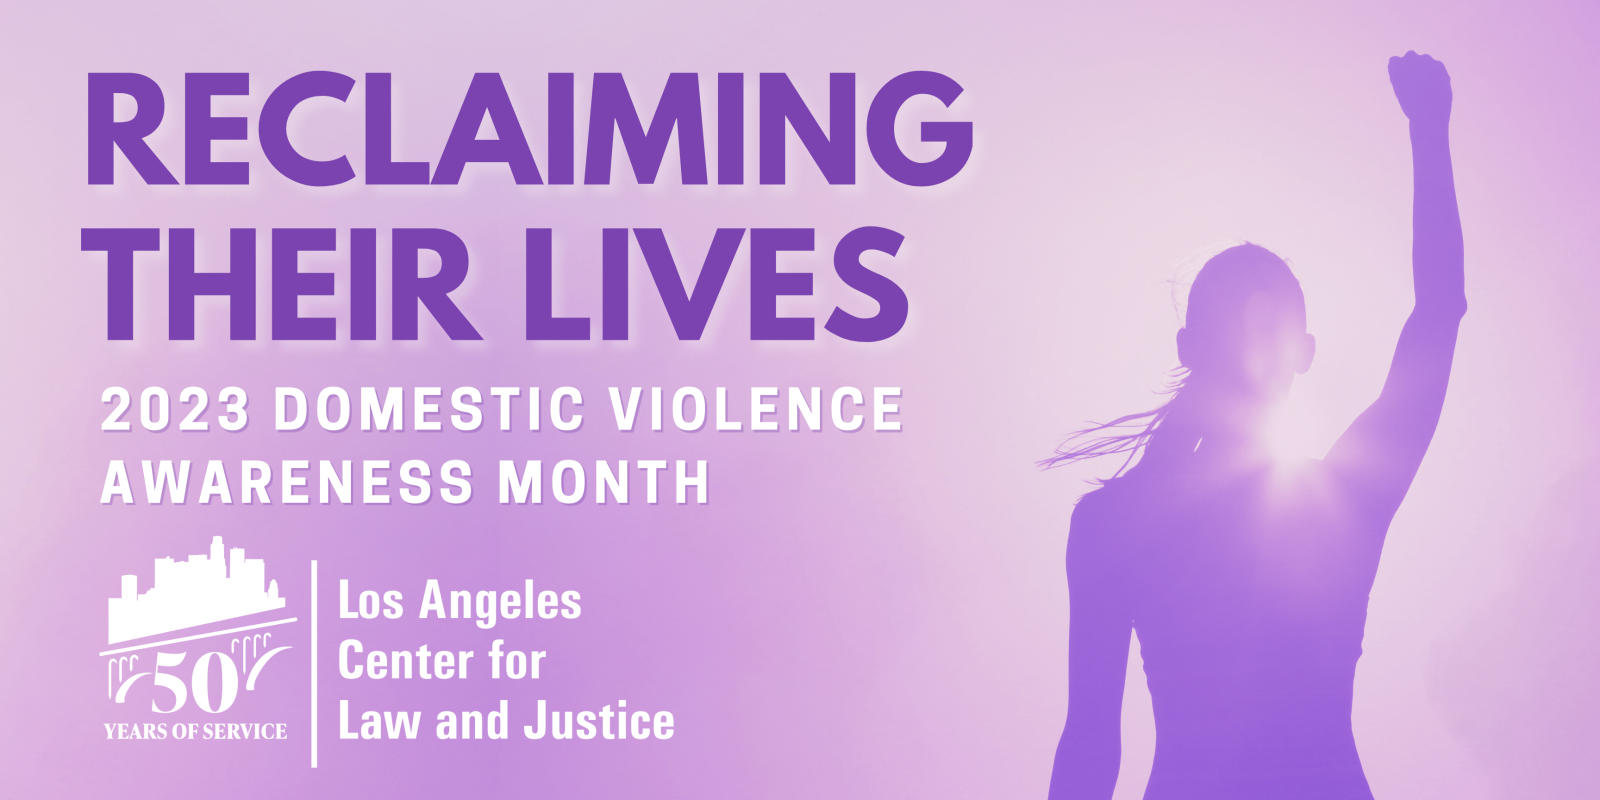 Reclaiming Their Lives 2023 Domestic Violence Awareness Month